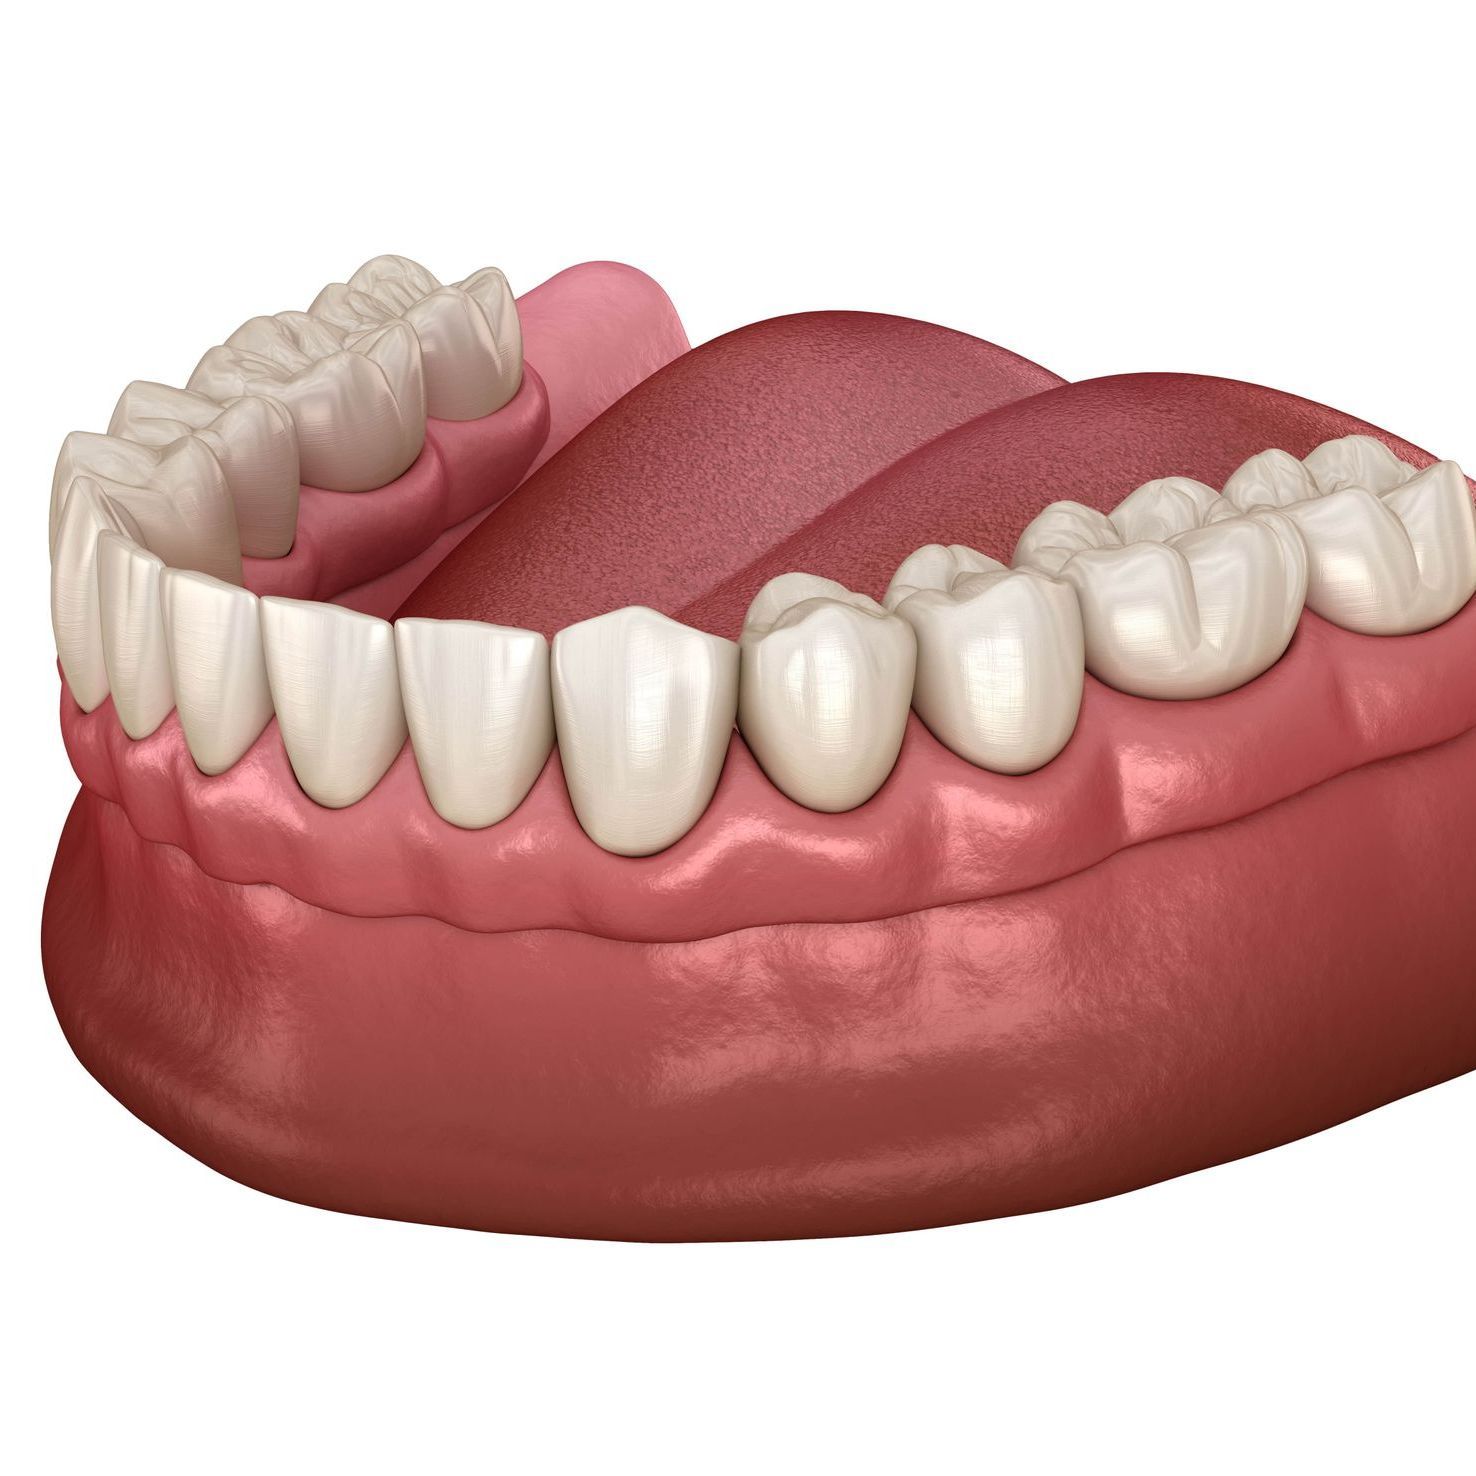 A computer generated image of a complete denture on the bottom jaw